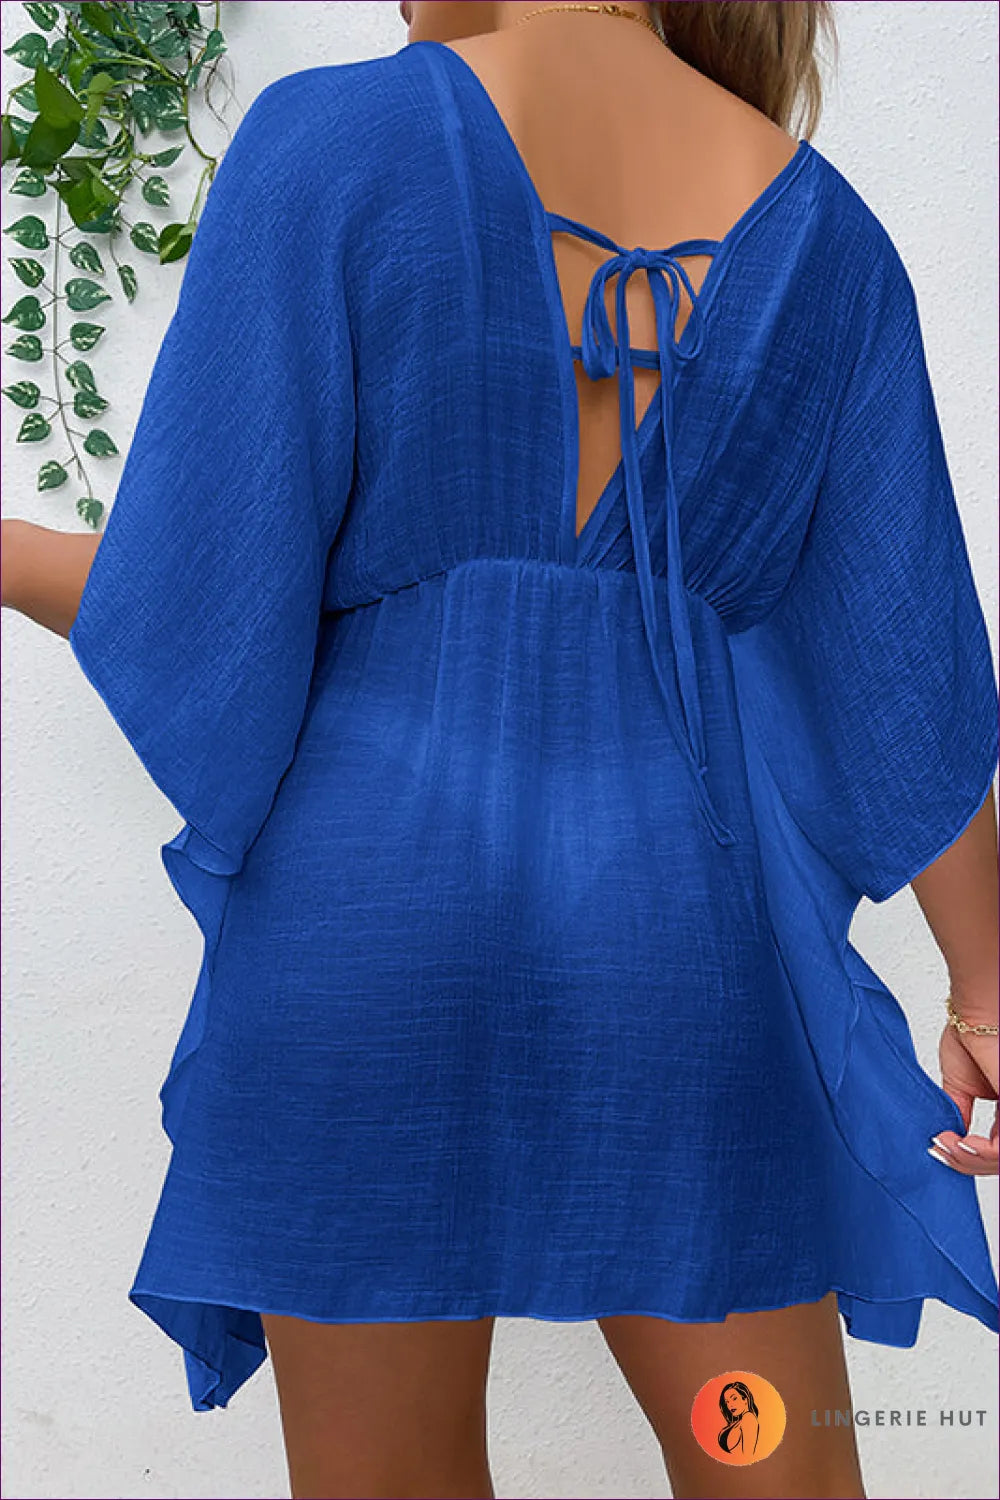 Breezy Beach Cover-up – Effortless Summer Style